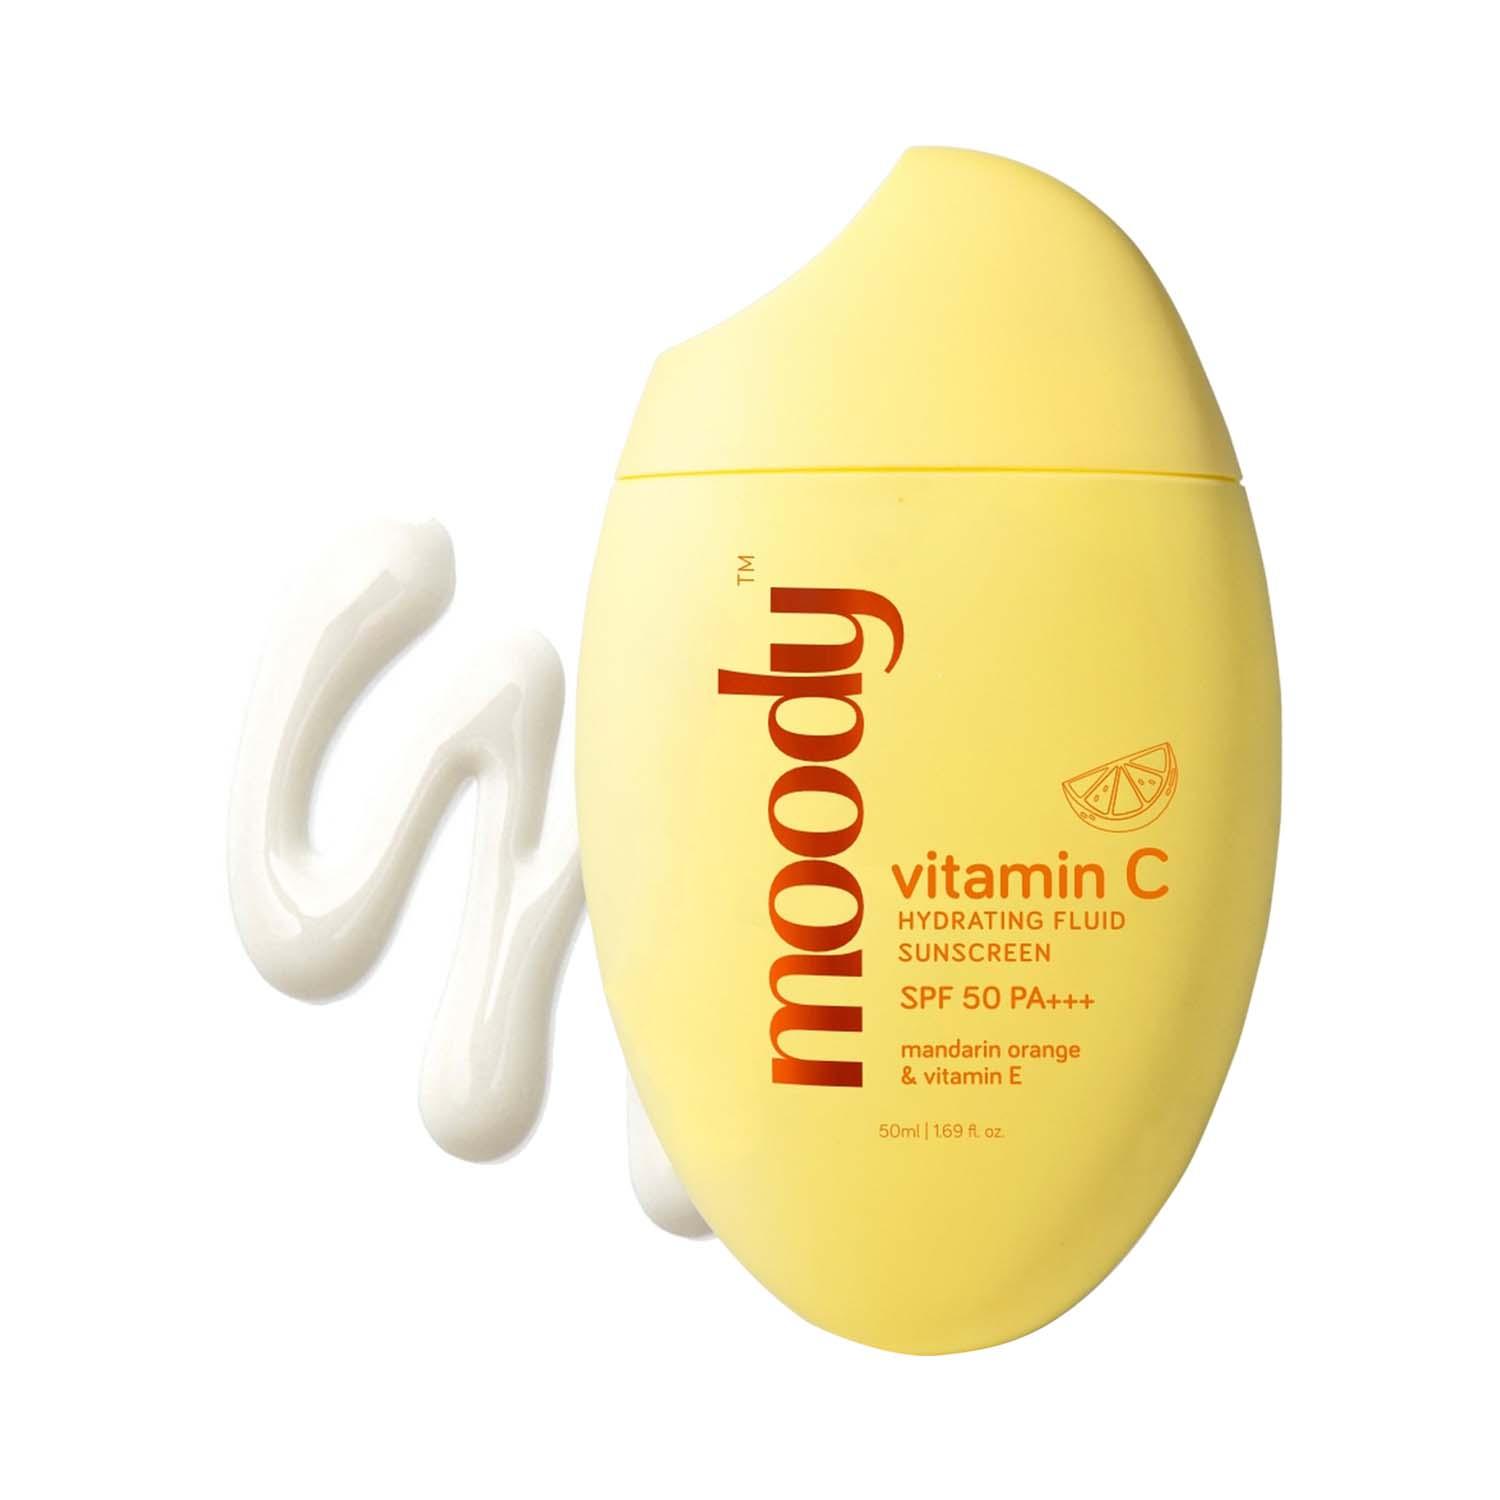  | Moody Vitamin C Hydrating Fluid Sunscreen with SPF 50 PA+++ (50 ml)